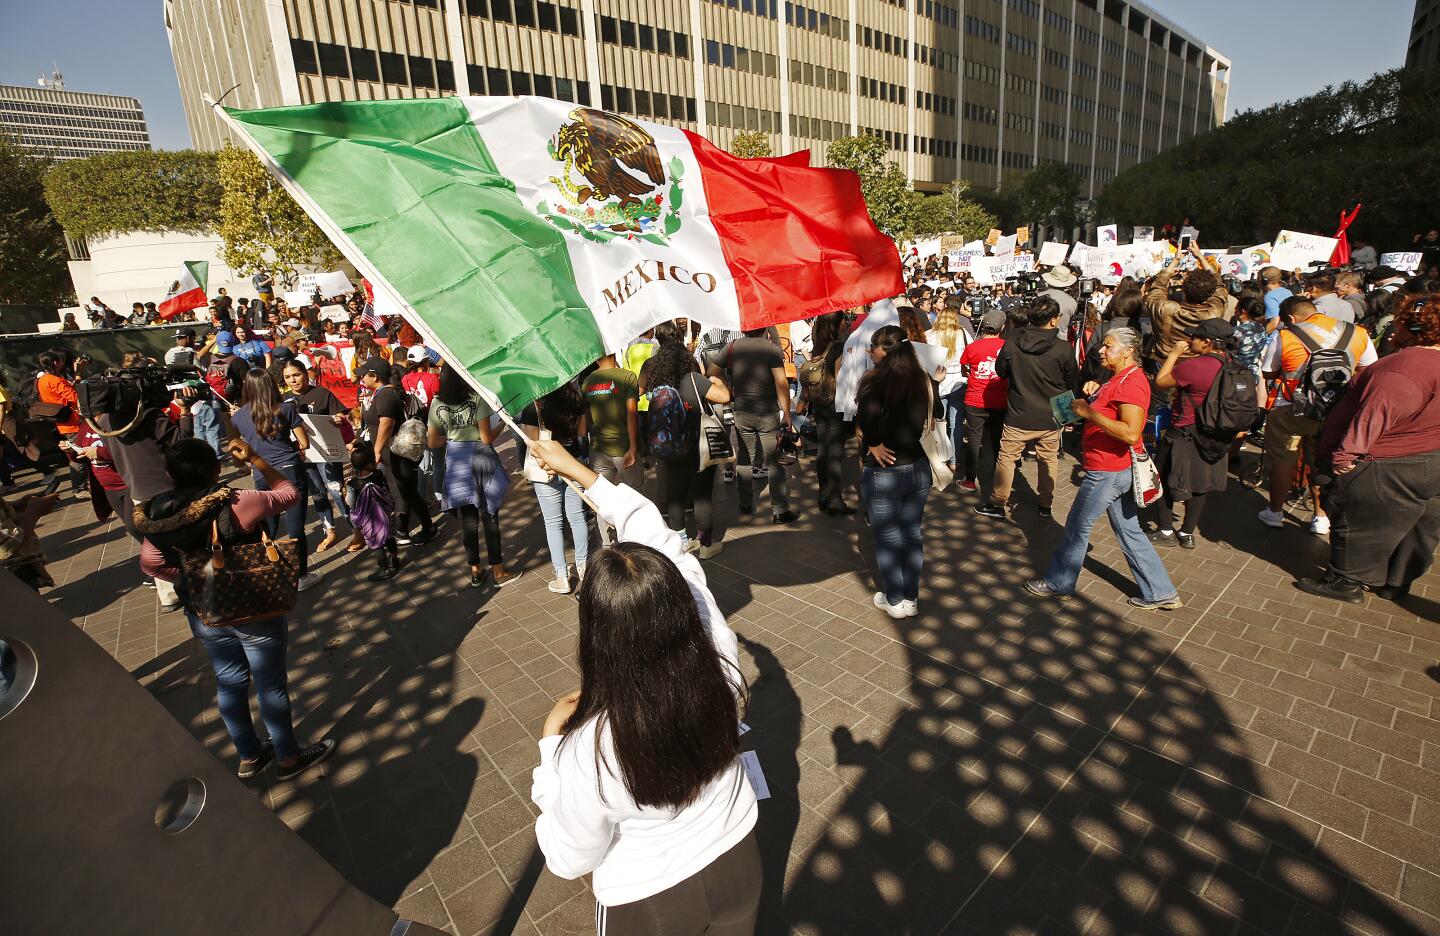 Michelle Gomez, 16, whose brother is a DACA recipient, waves the flag of Mexico at the downtown L.A. rally.